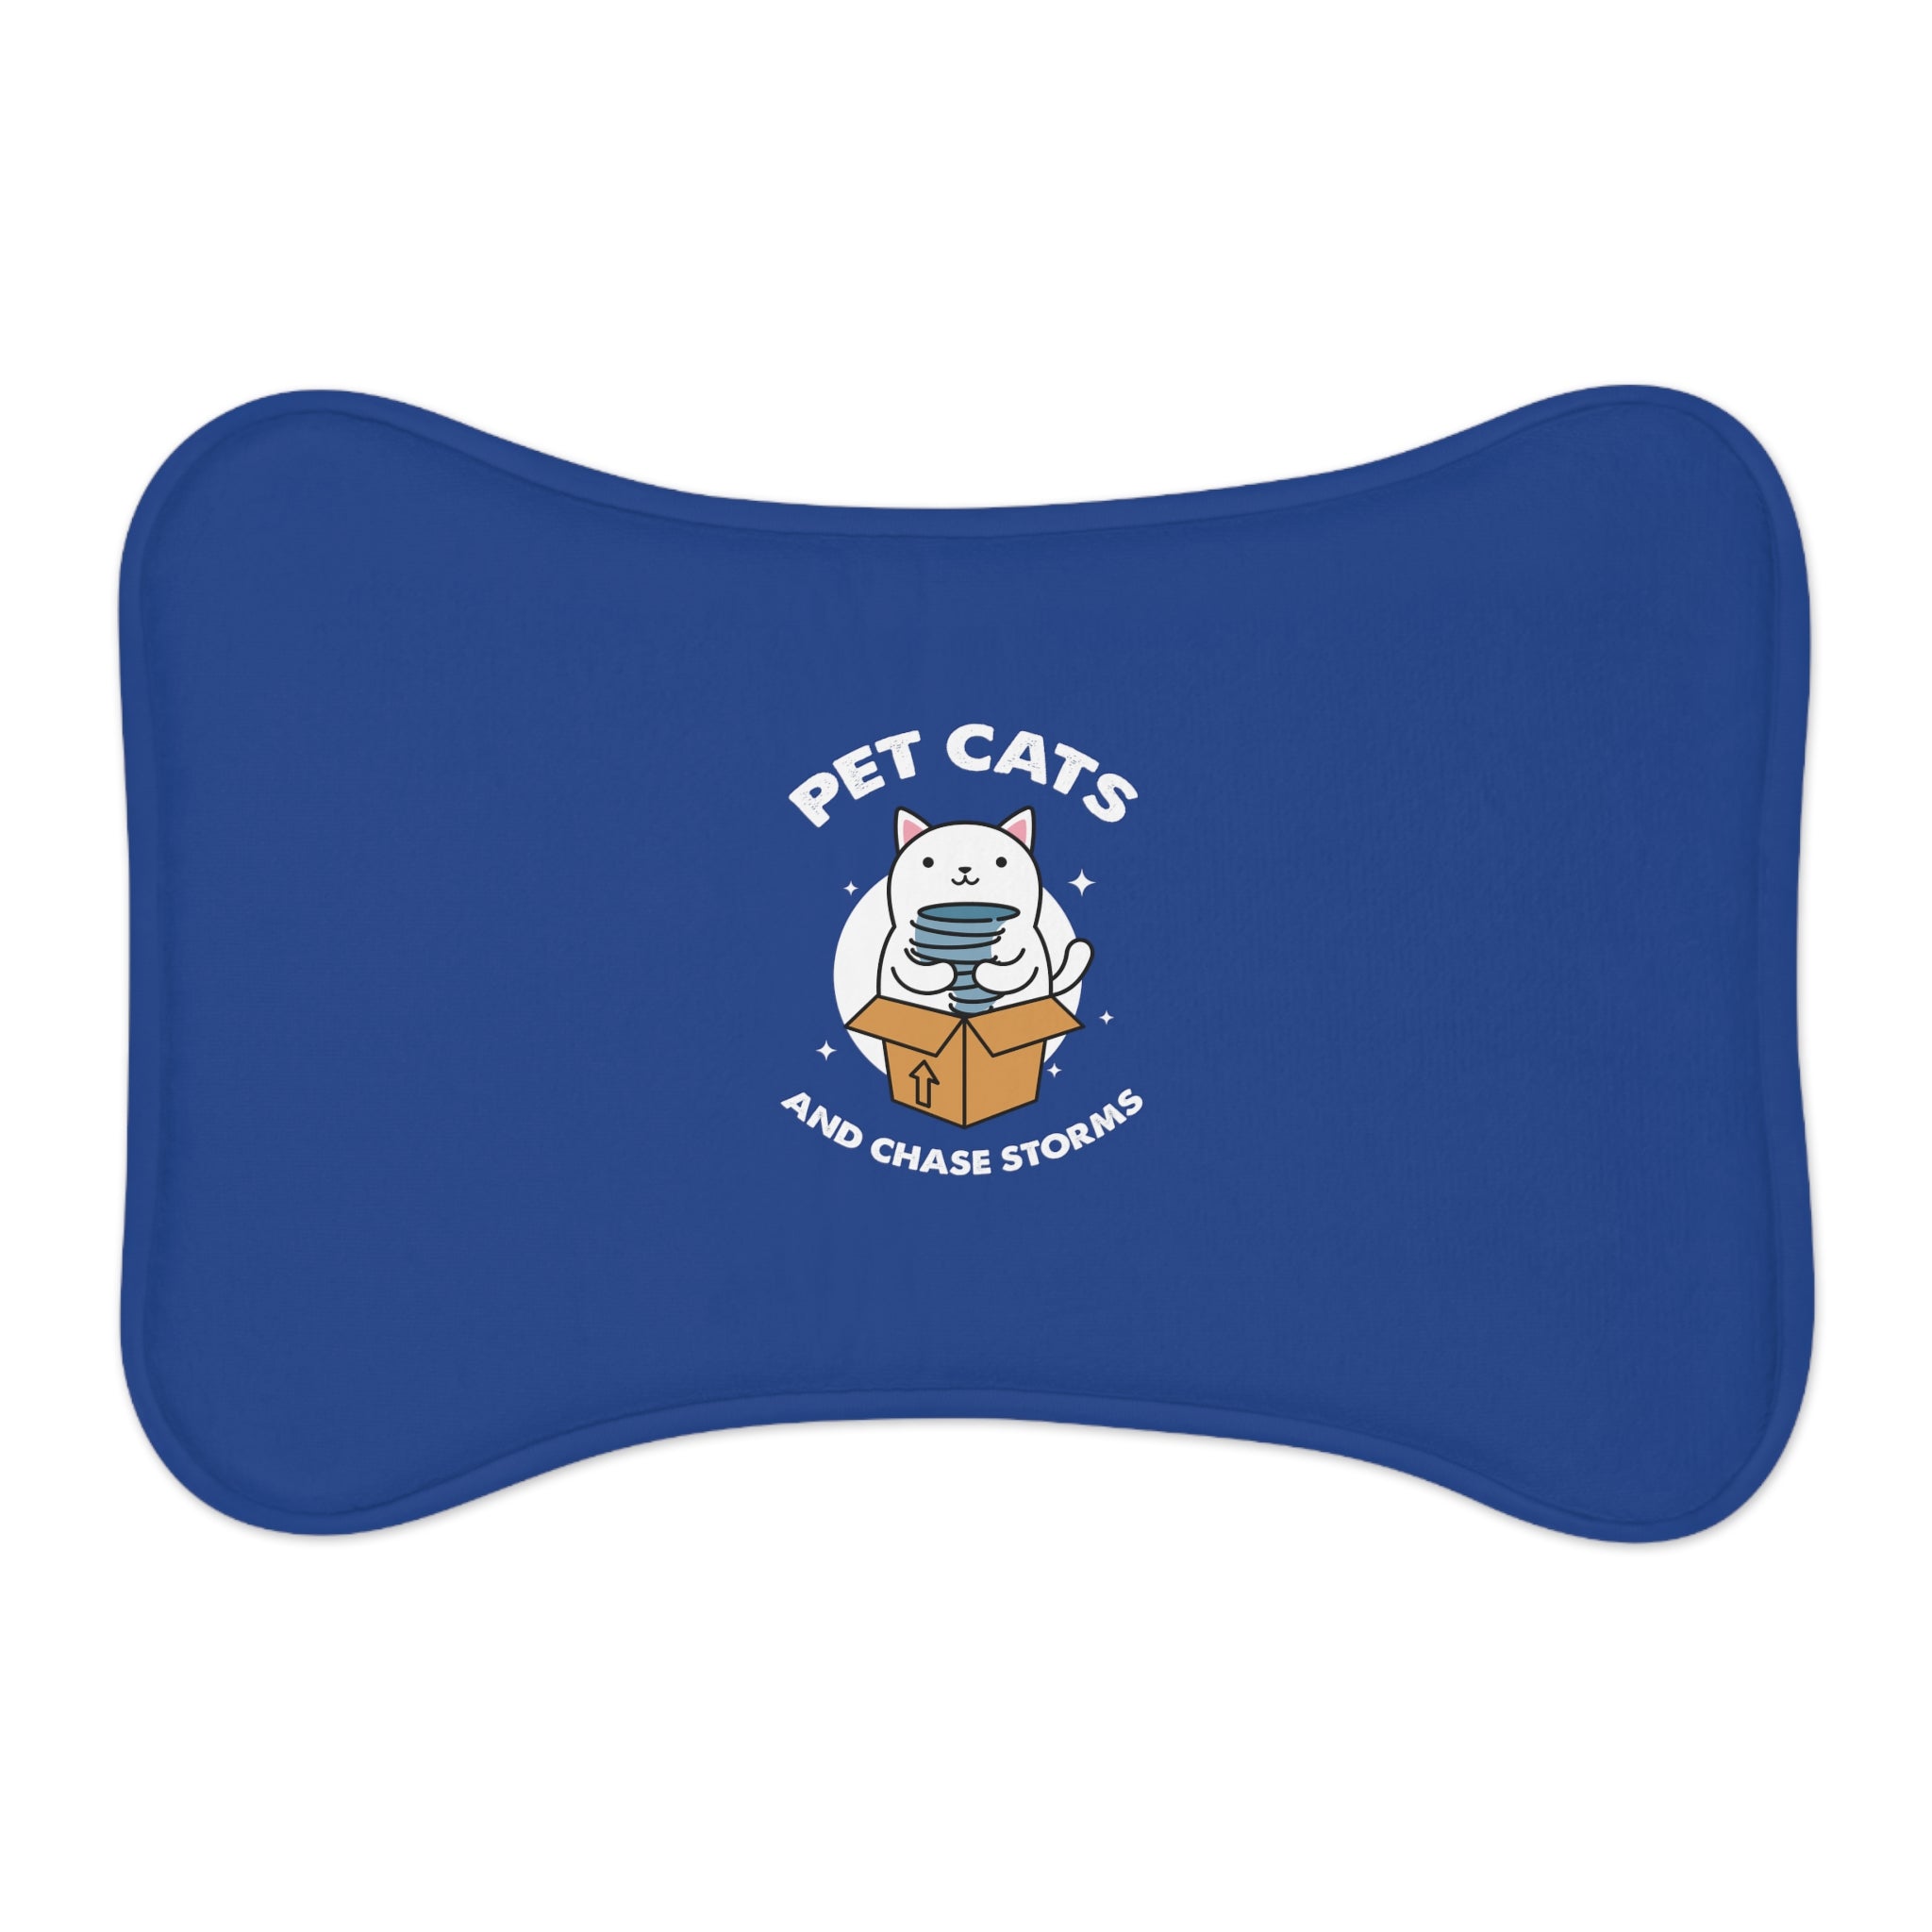 Pet Cats and Chase Storms Pet Feeding Mat 